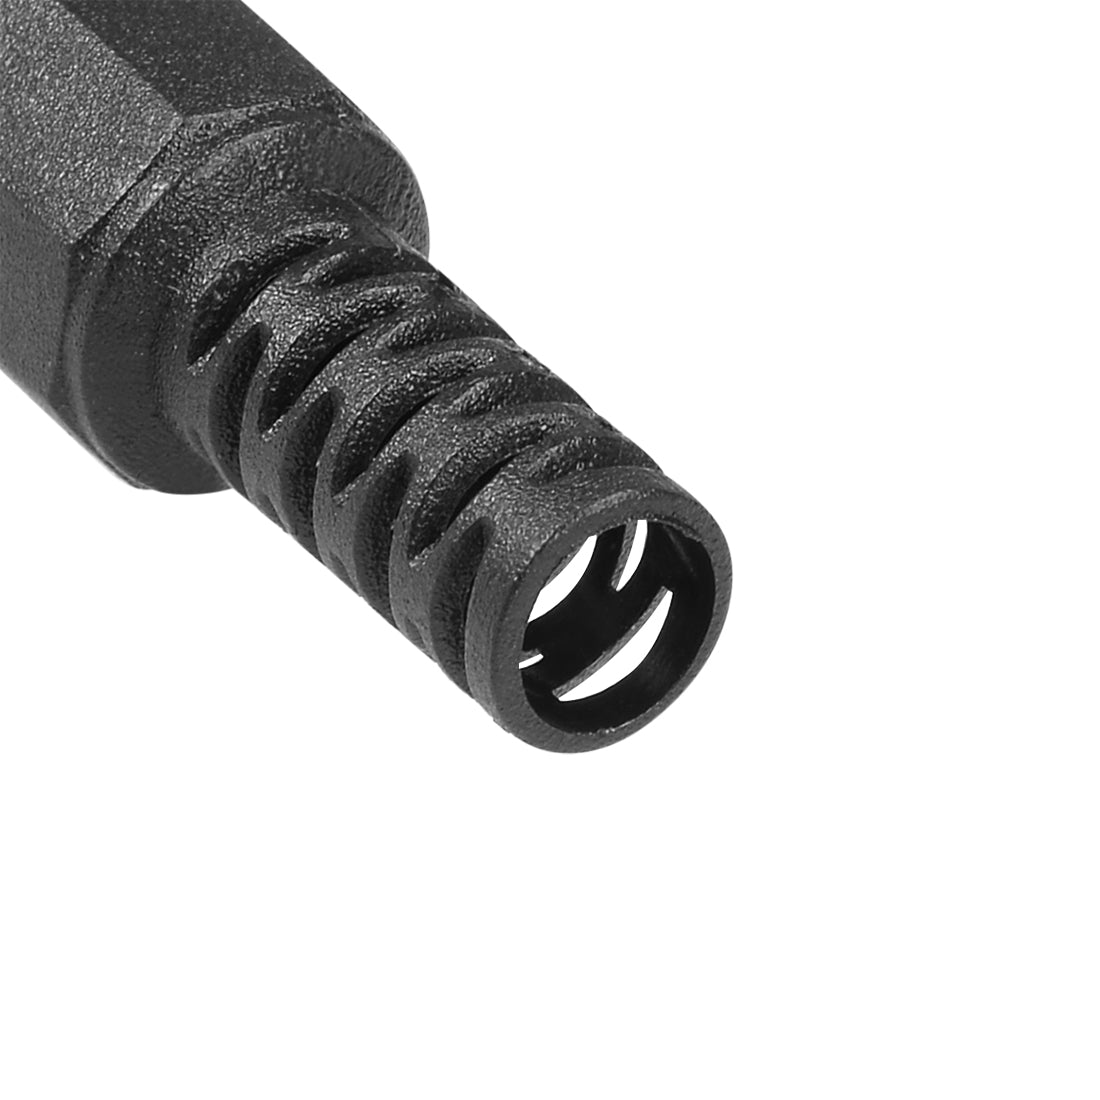 uxcell Uxcell 10 Pcs 5.5mm x 2.1mm Straight Male DC Power Jack Solder Connector Adapter